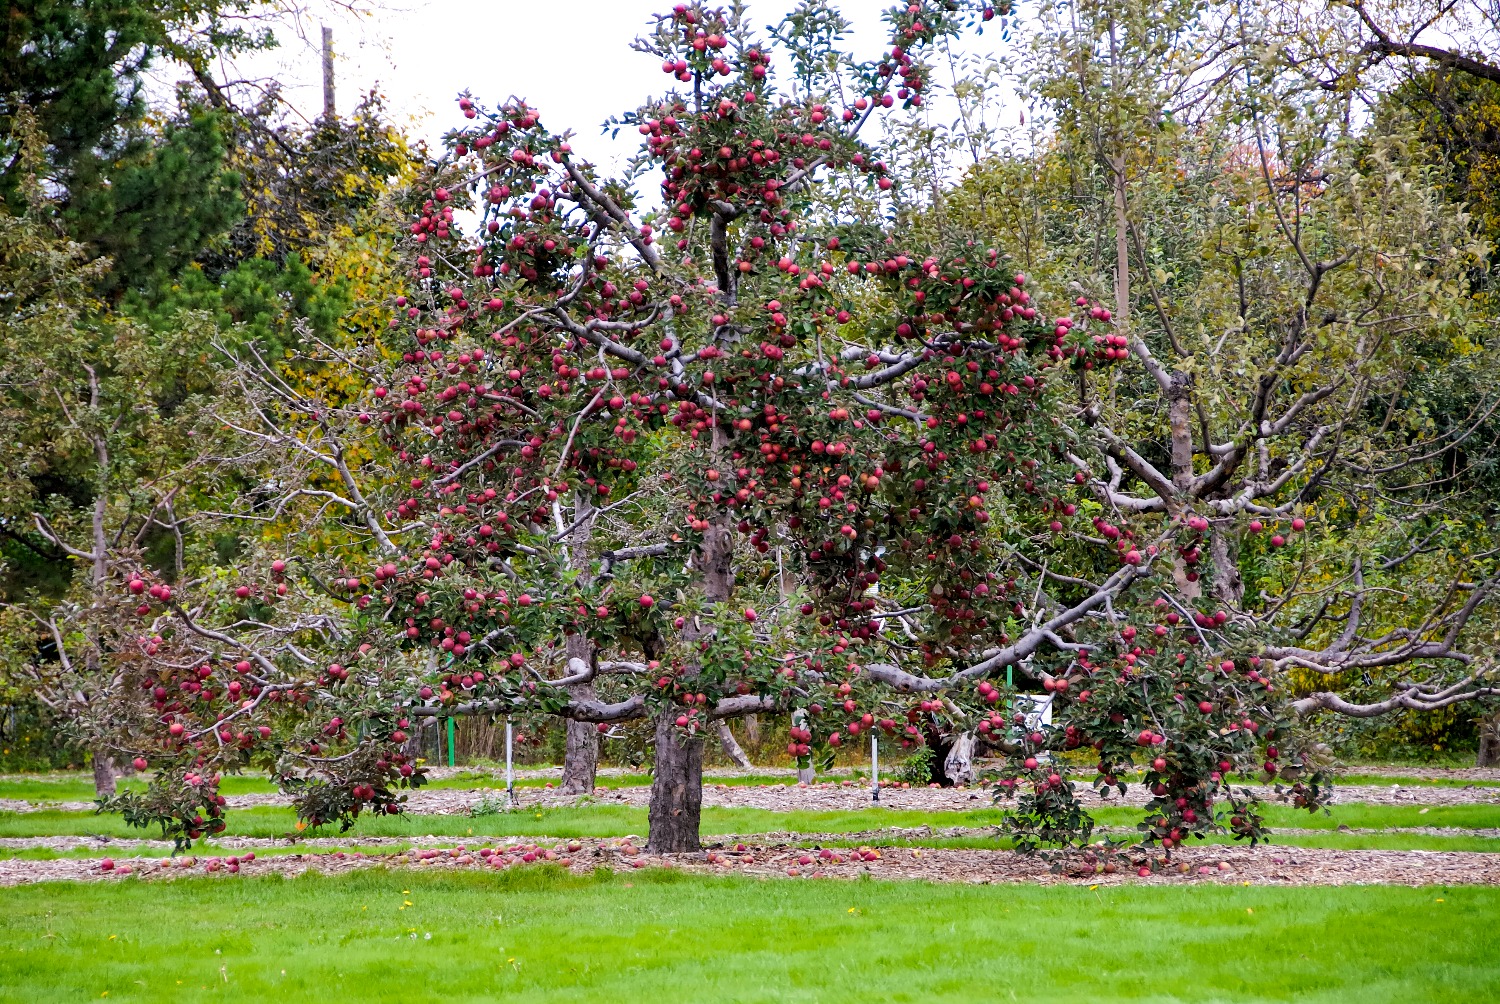 An apple tree filled with apples